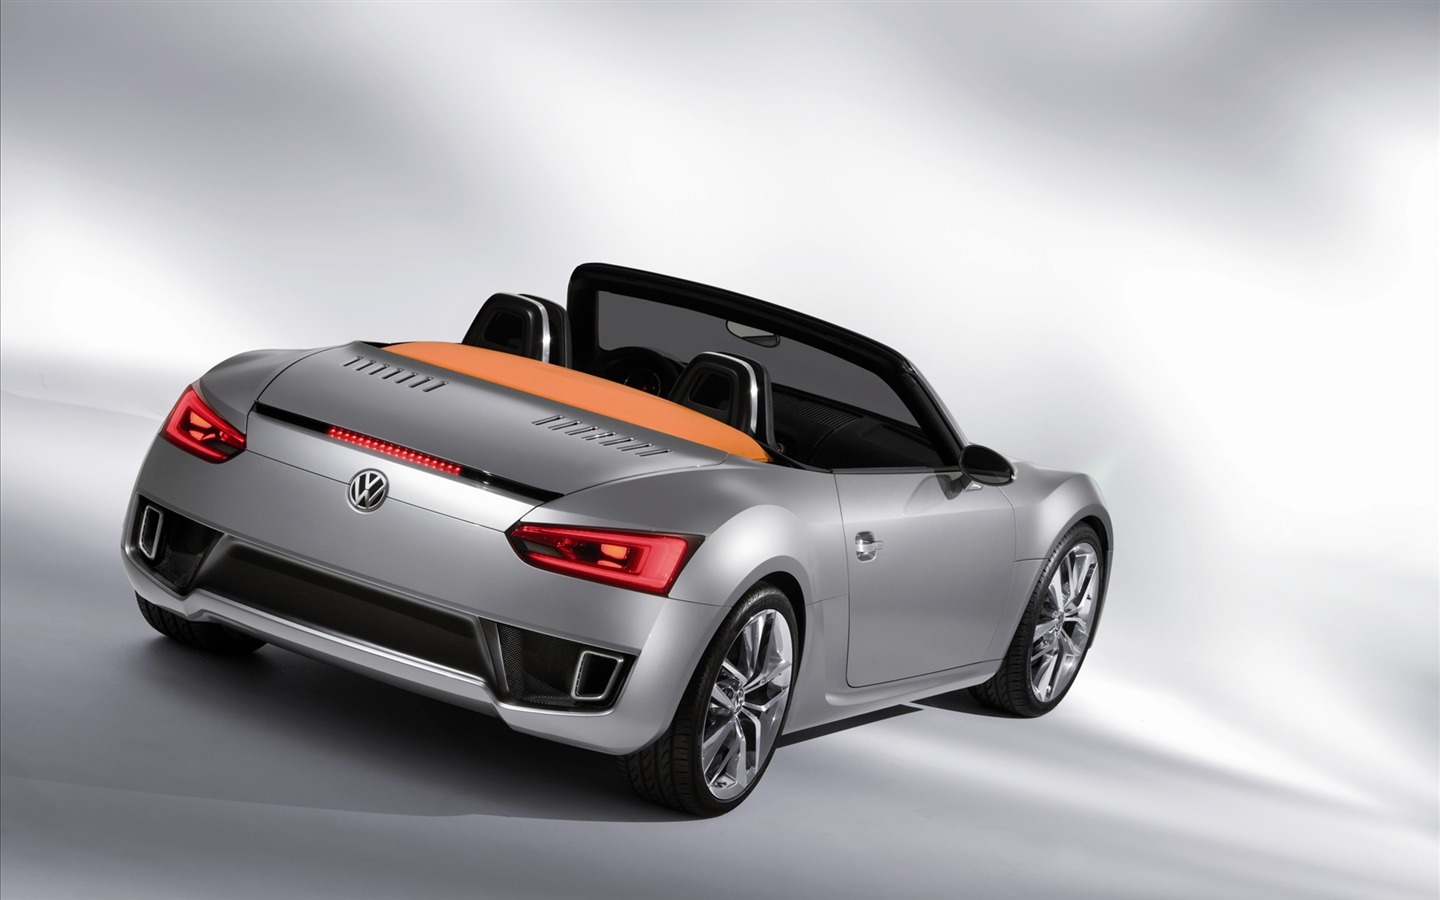 Volkswagen Concept Car tapety (1) #8 - 1440x900